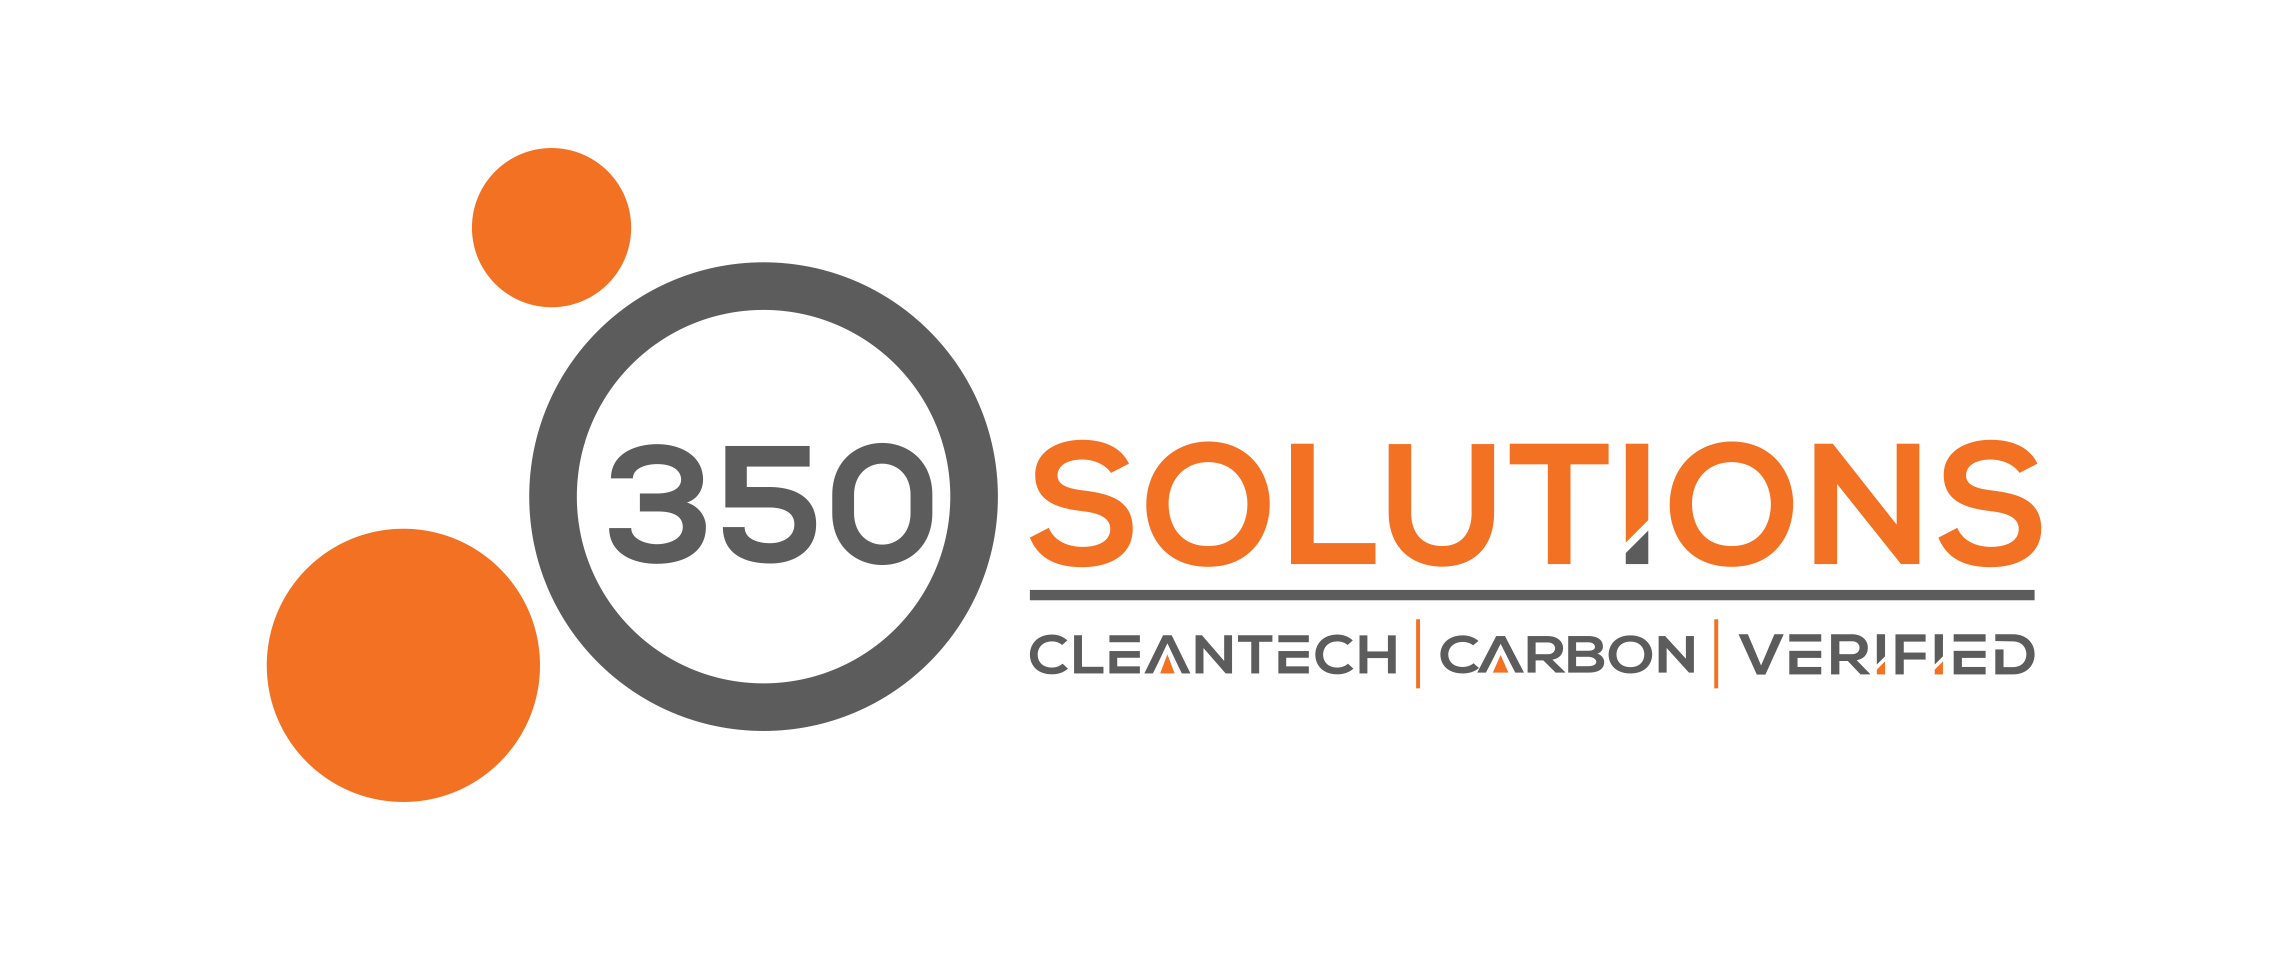 350 Solutions